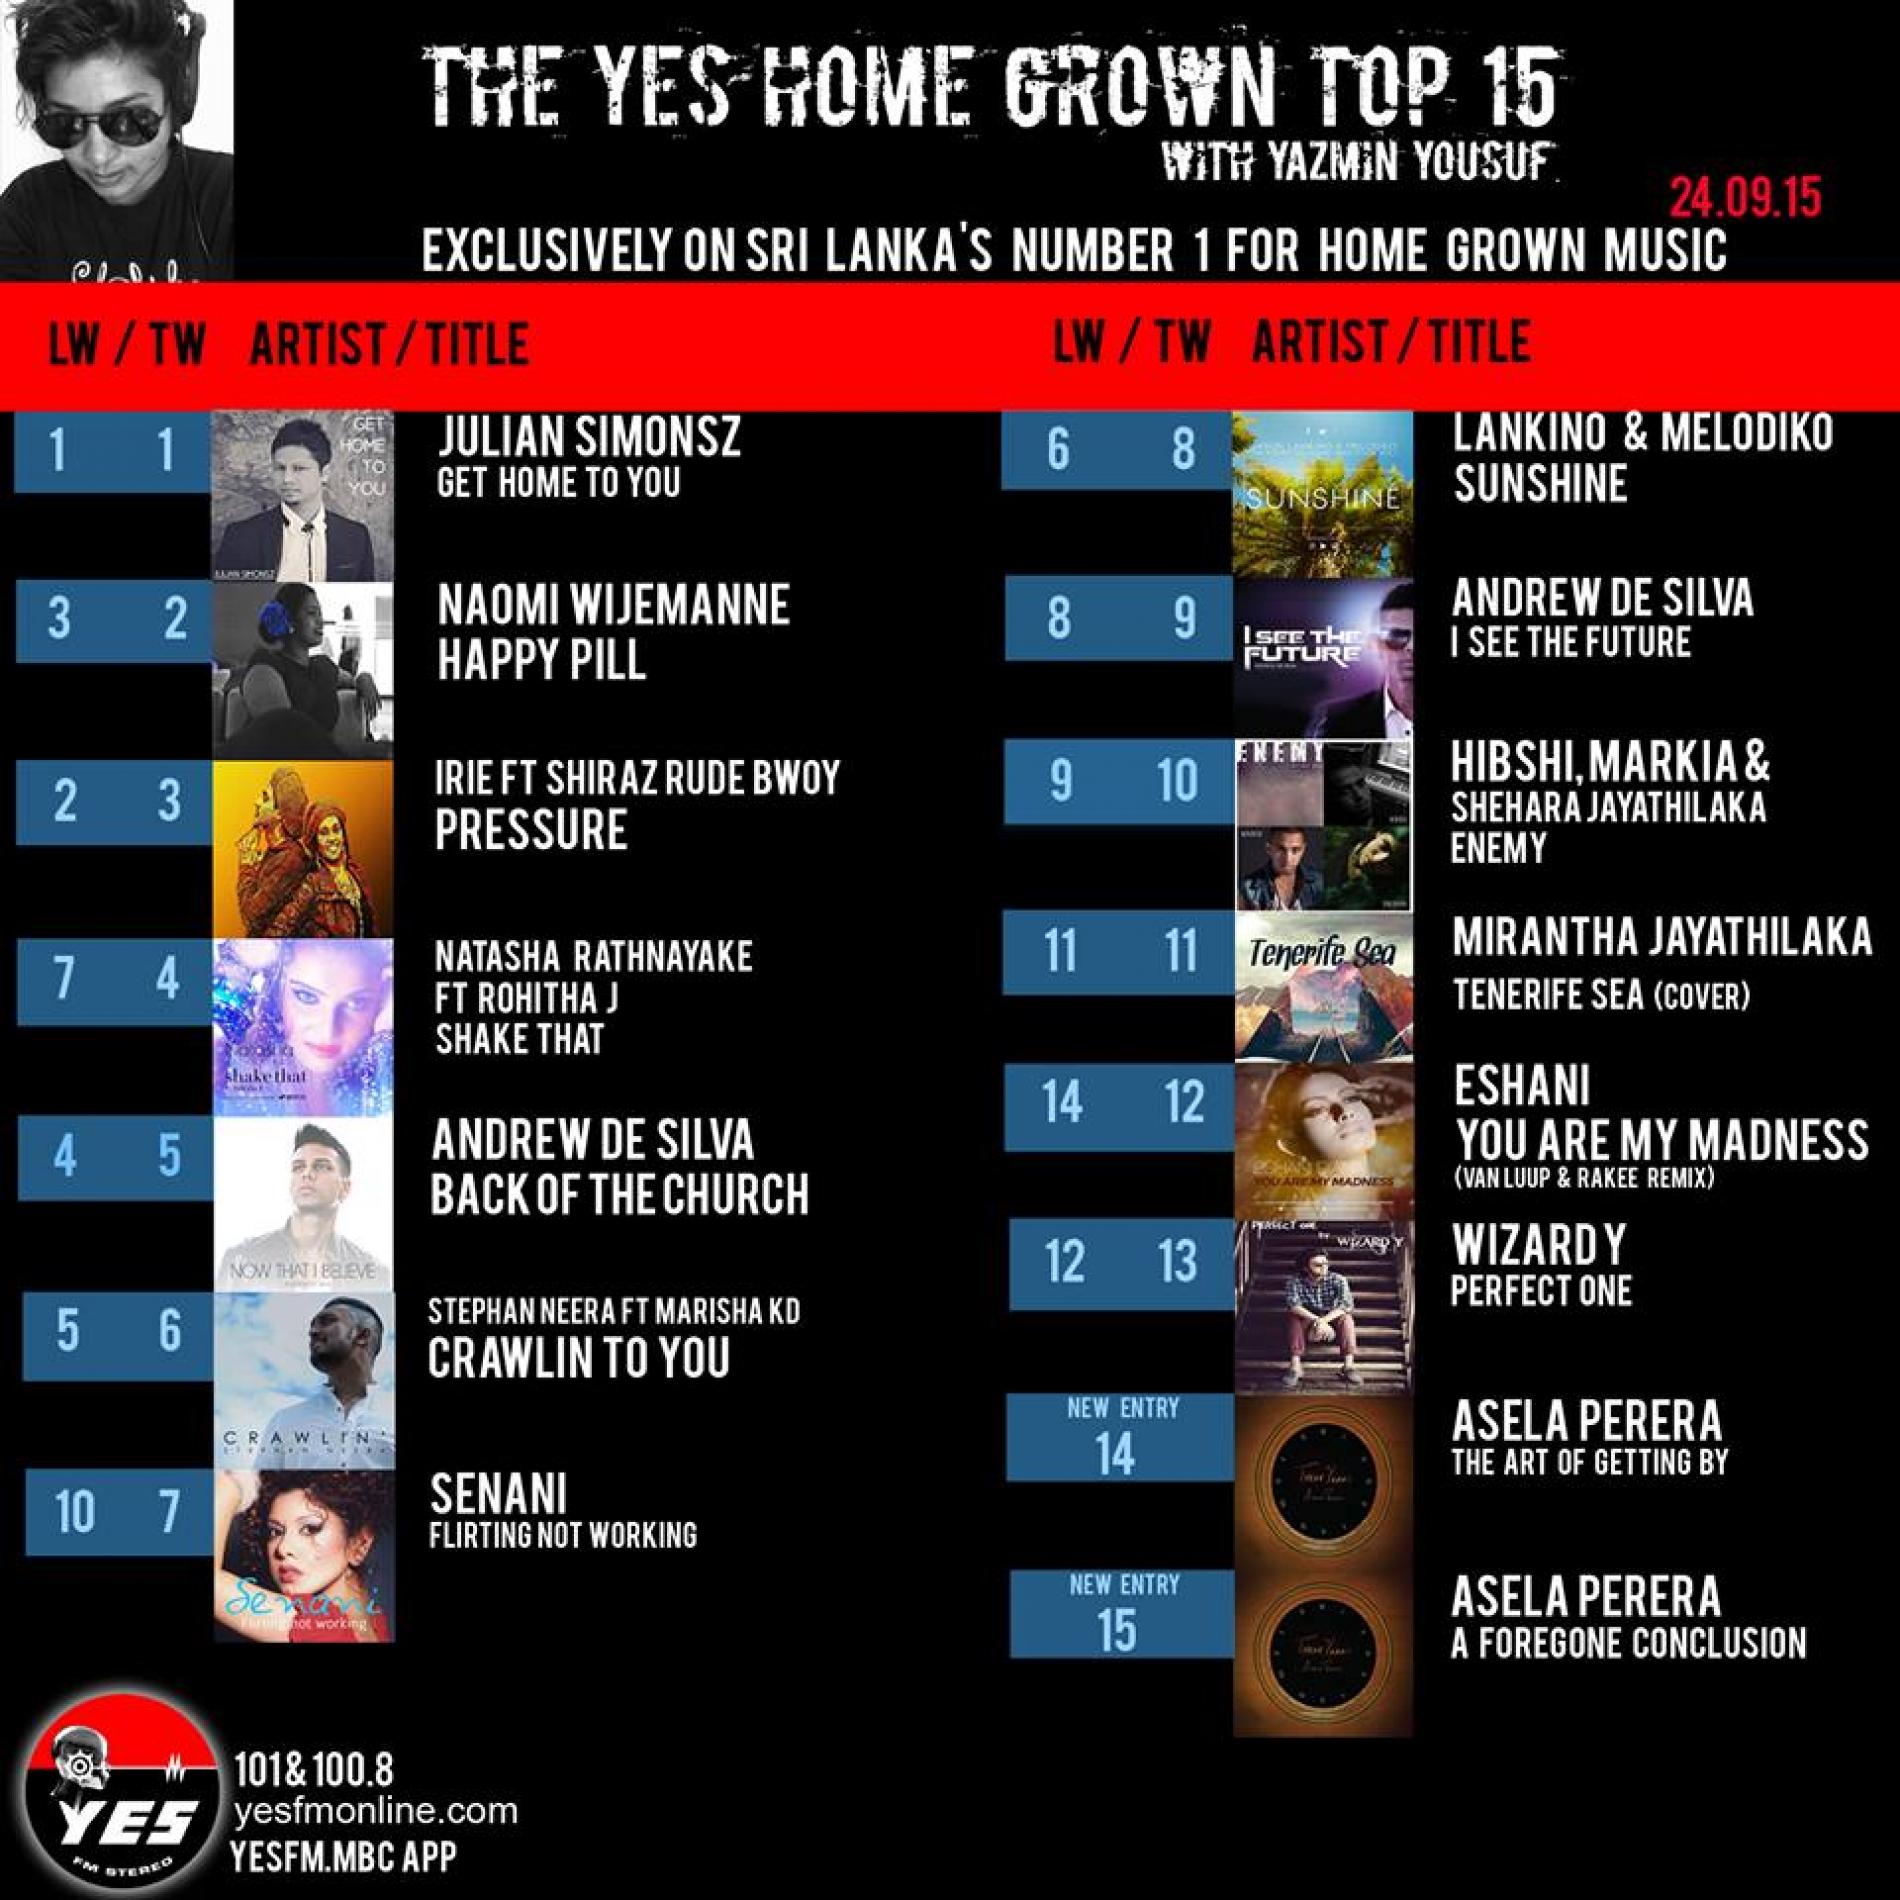 Its Week Number 2 On Top The YES Home Grown Top 15